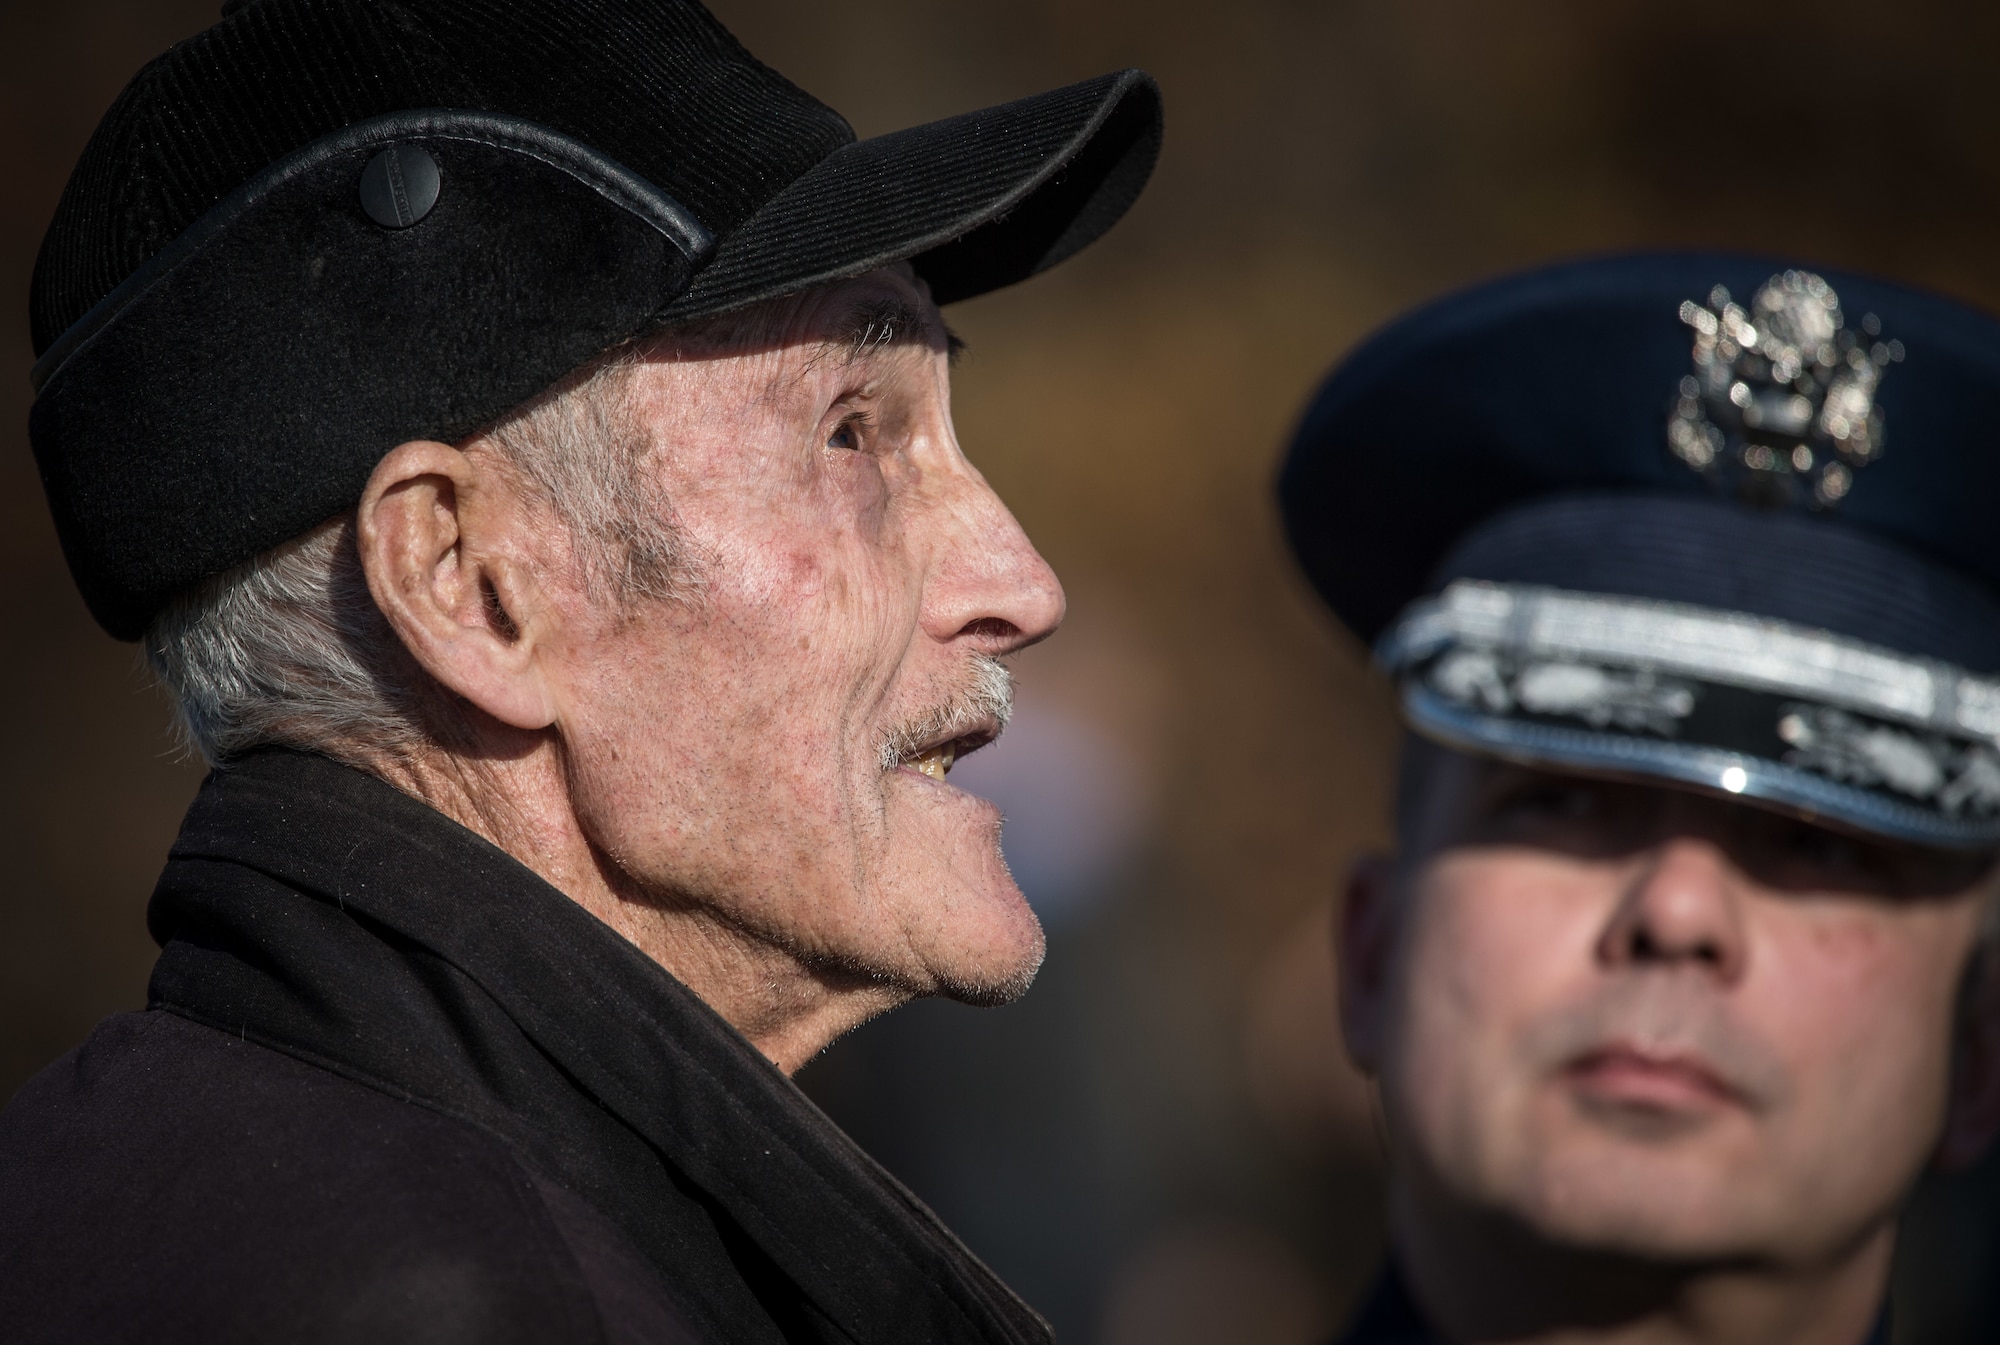 A Serbian man, who was a child when his family cared for downed WWII Airmen, recounts the day in 1944 when the Airmen were shot down behind enemy lines at the Operation Halyard memorial in Pranjani, Serbia, Nov. 17, 2016.  The U.S. State Department, U.S. Air Force, Royal Air Force and Serbian Armed Forces were in attendance to commemorate the event and the heroic actions of the Serbian people. Operation Halyard was the rescue mission to save more than 500 Allied Airmen who were shot down over Serbia during WWII. The local Serbians housed and fed the downed Airmen, while also keeping their presence a secret from the German forces searching for them. The operation was, and still is, the largest rescue of downed Americans. (U.S. Air Force photo by Tech. Sgt. Ryan Crane)